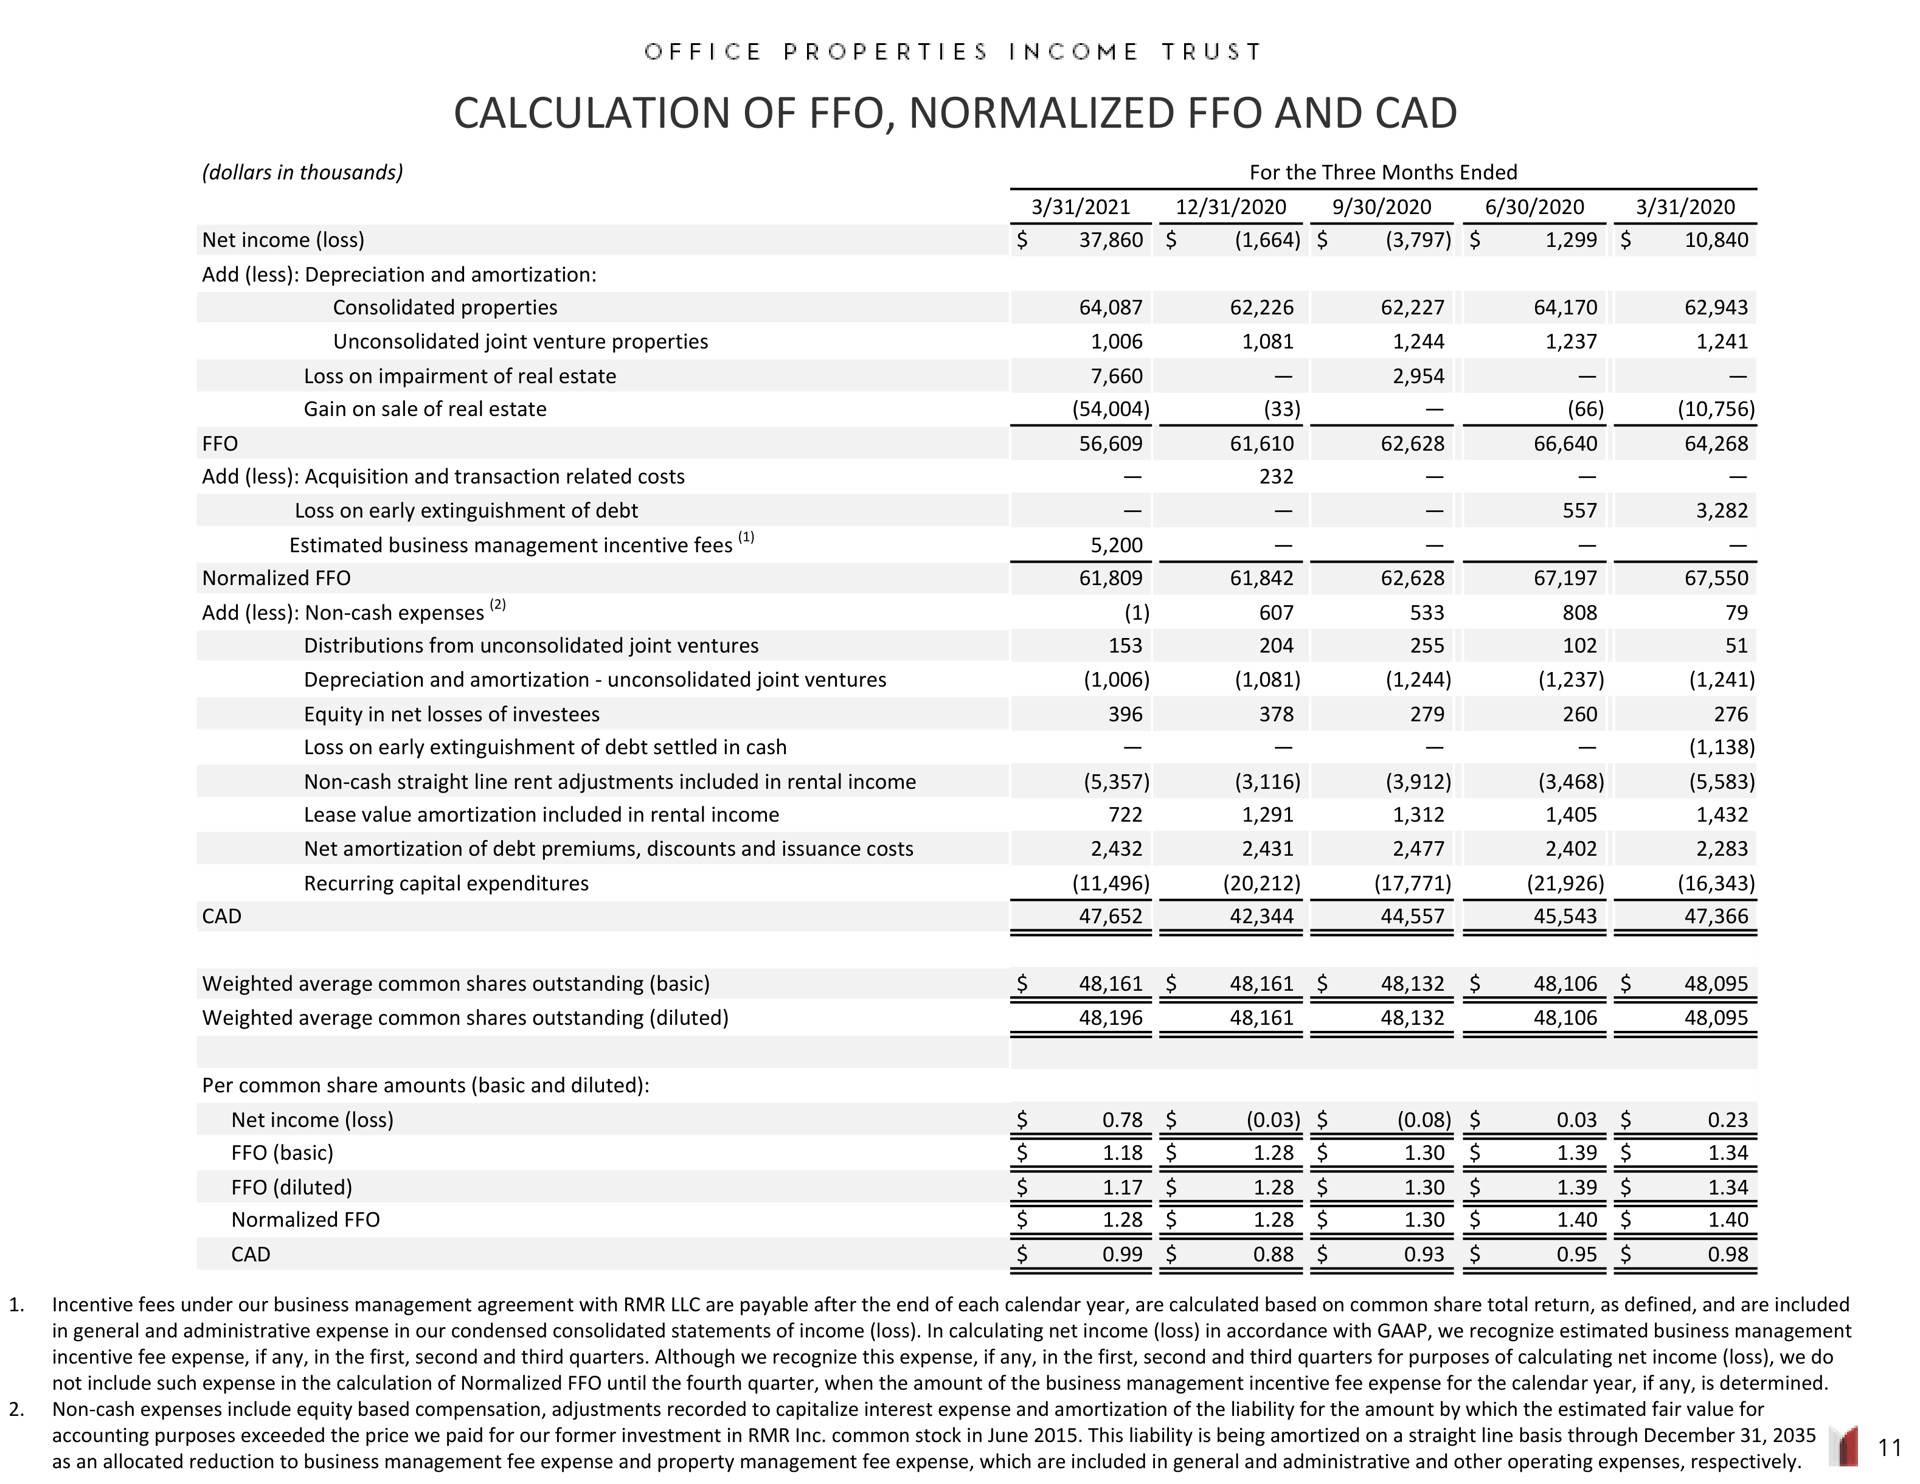 calculation of normalized and cad | Office Properties Income Trust